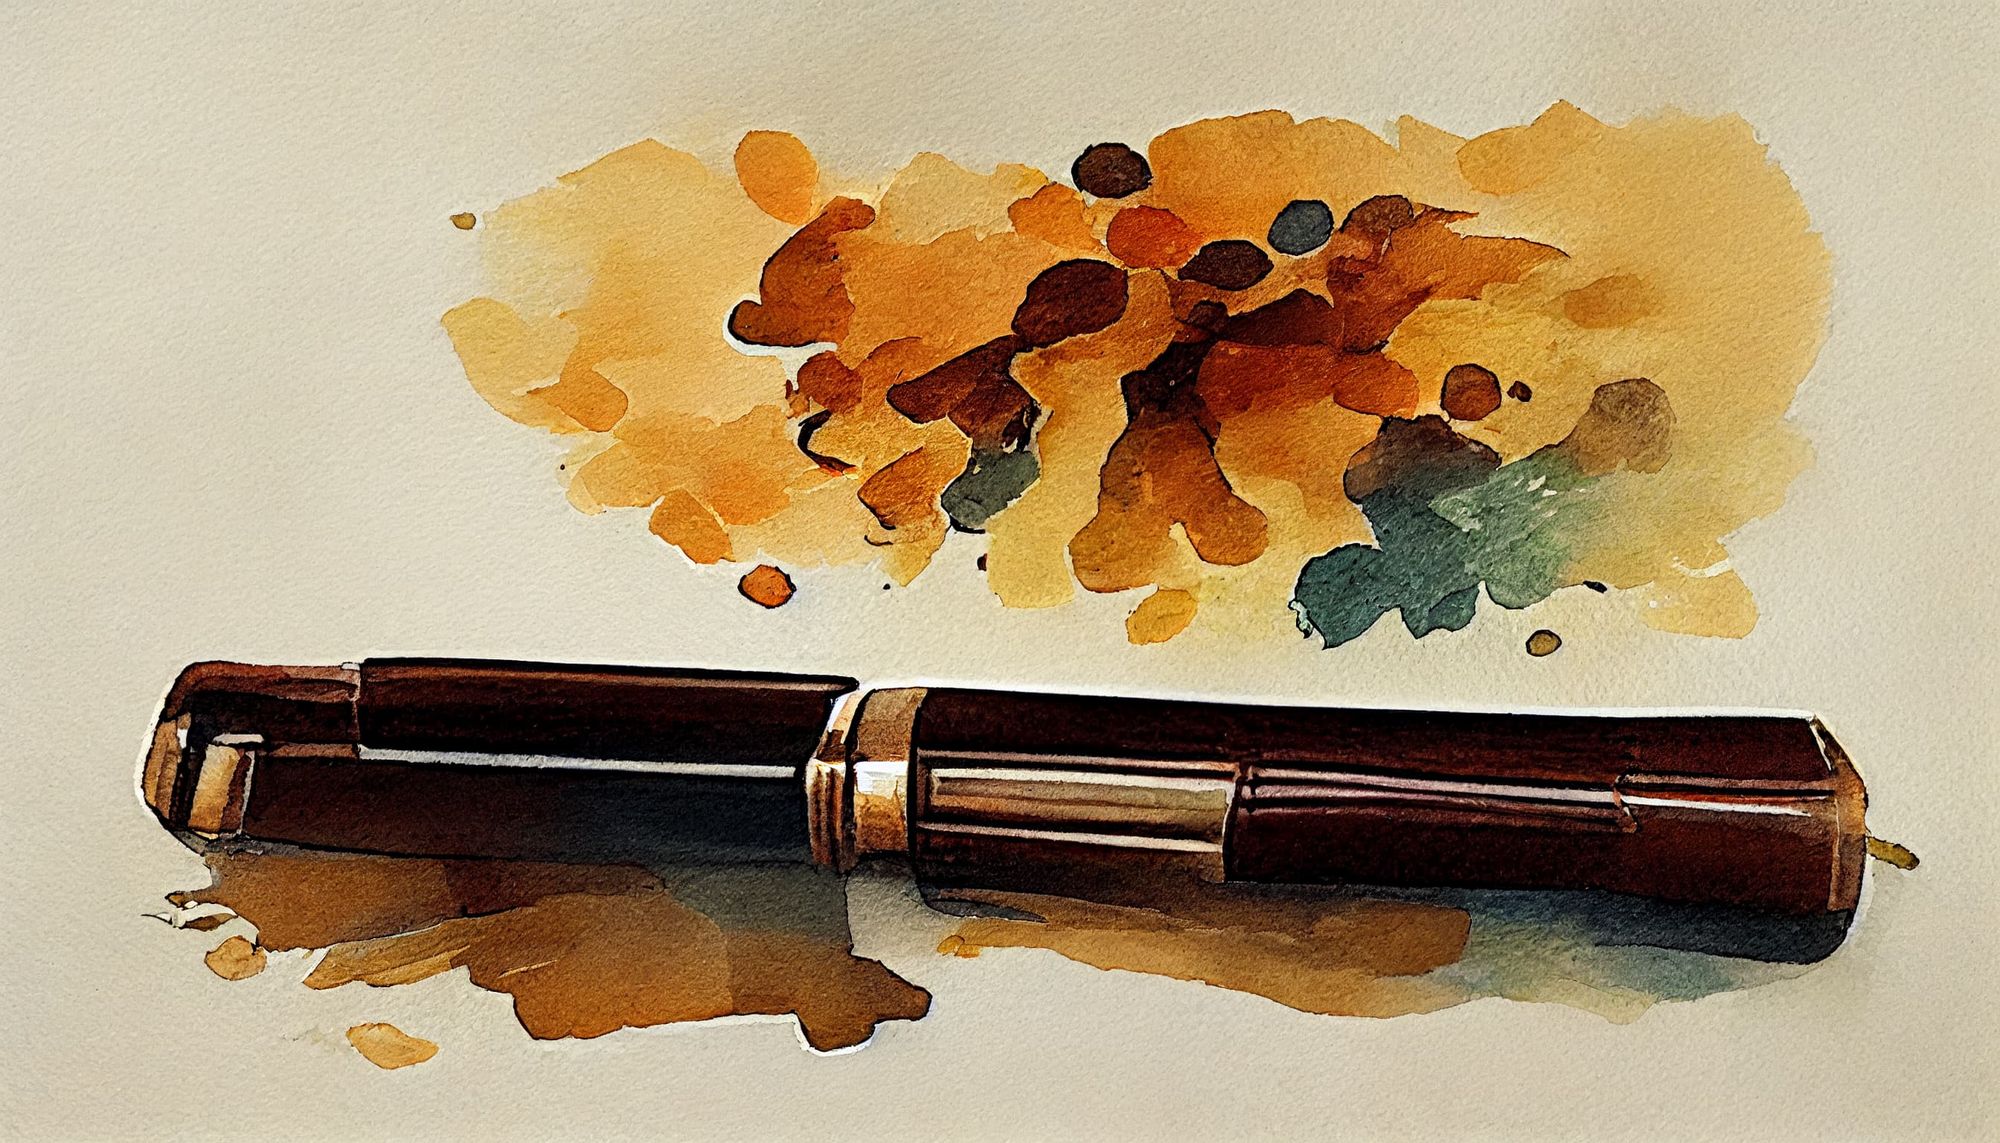 watercolor of a fountain pen on a brown desk